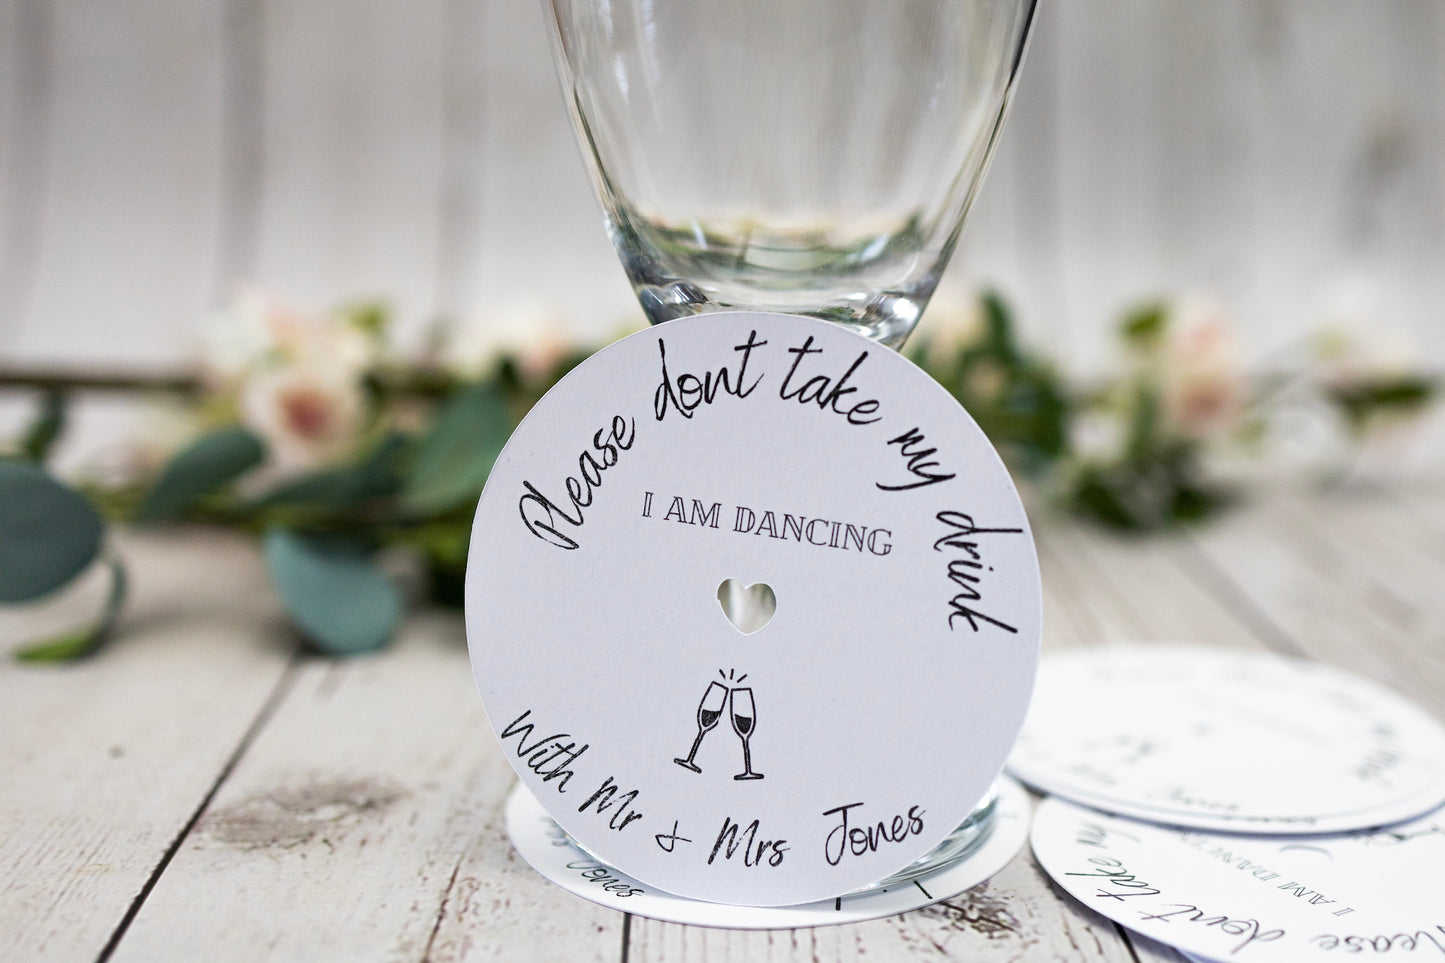 Wedding drinks Coaster, Set Of 10, Wedding Drink Cover, Please Don't Take My Drink I'm Dancing, drinks covers